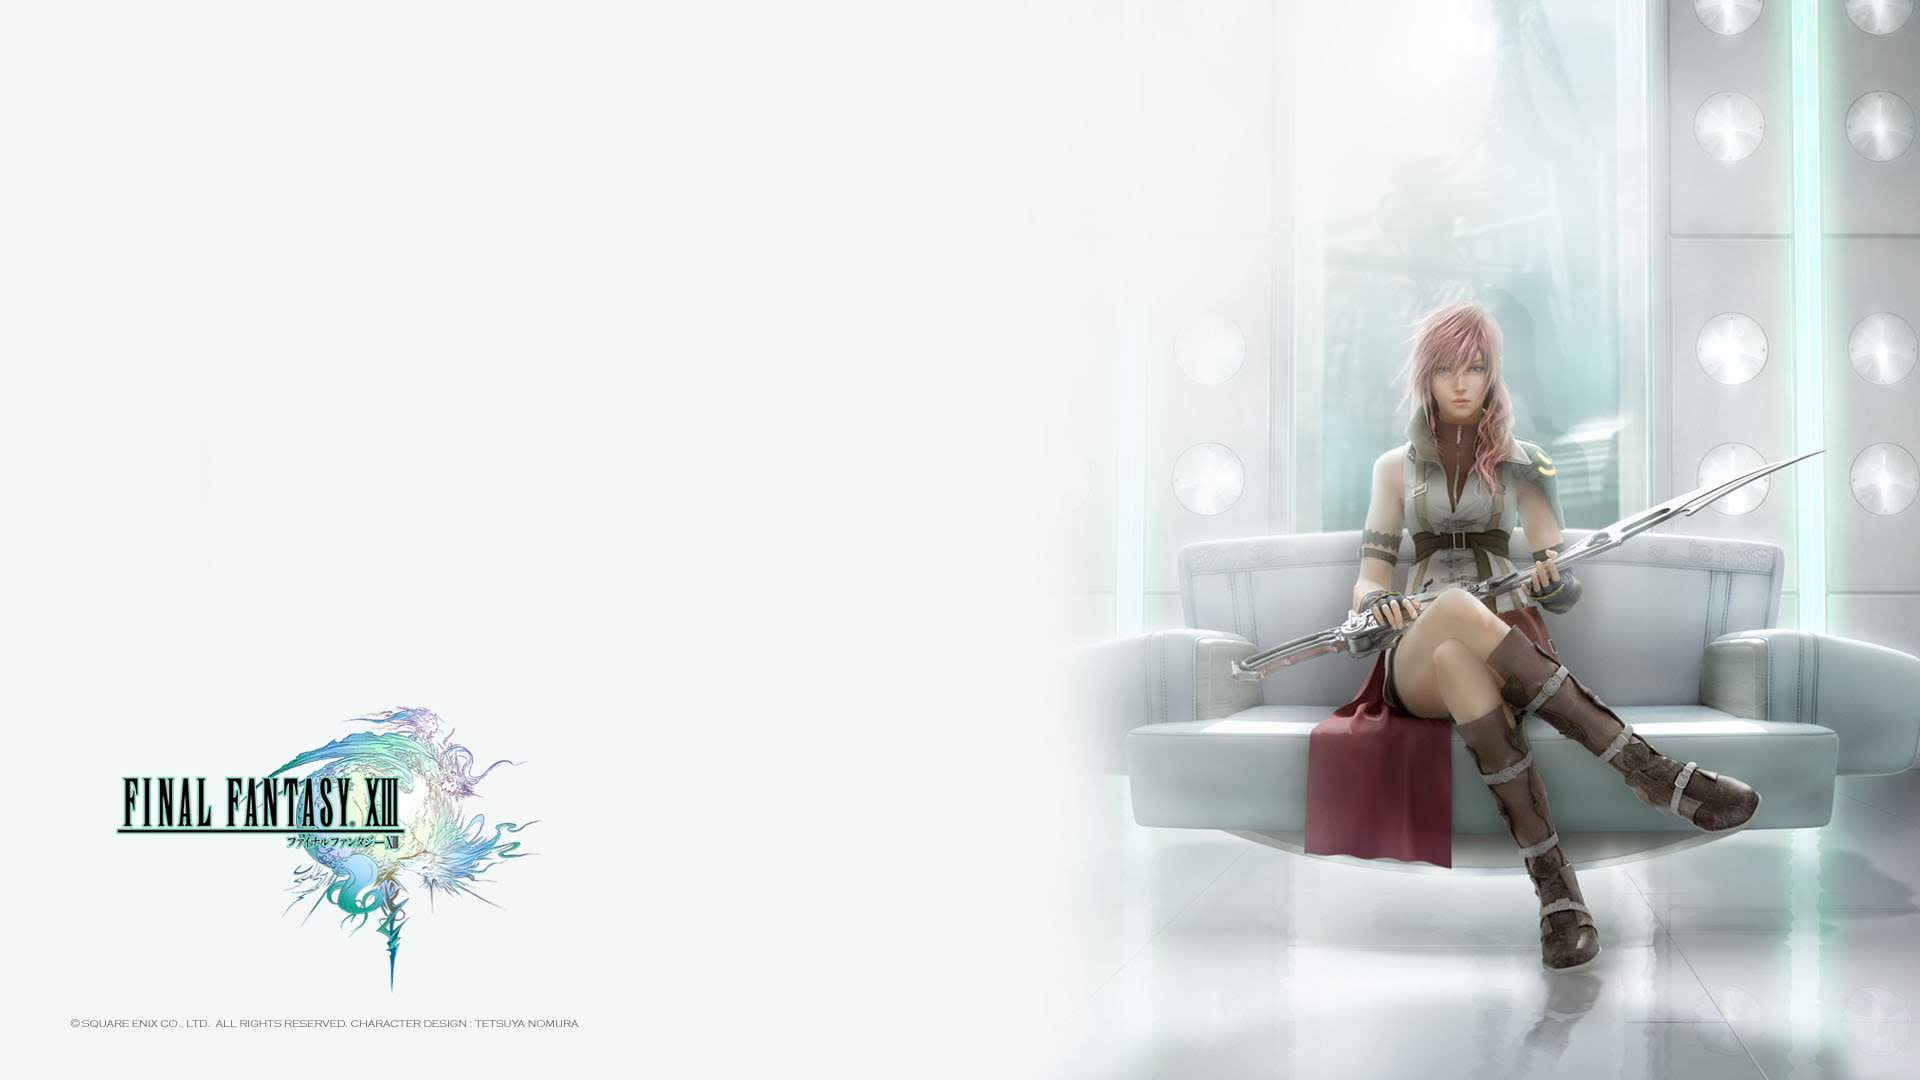 General 1920x1080 Games posters Final Fantasy XIII Claire Farron Gunblade video games video game characters Square Enix Final Fantasy